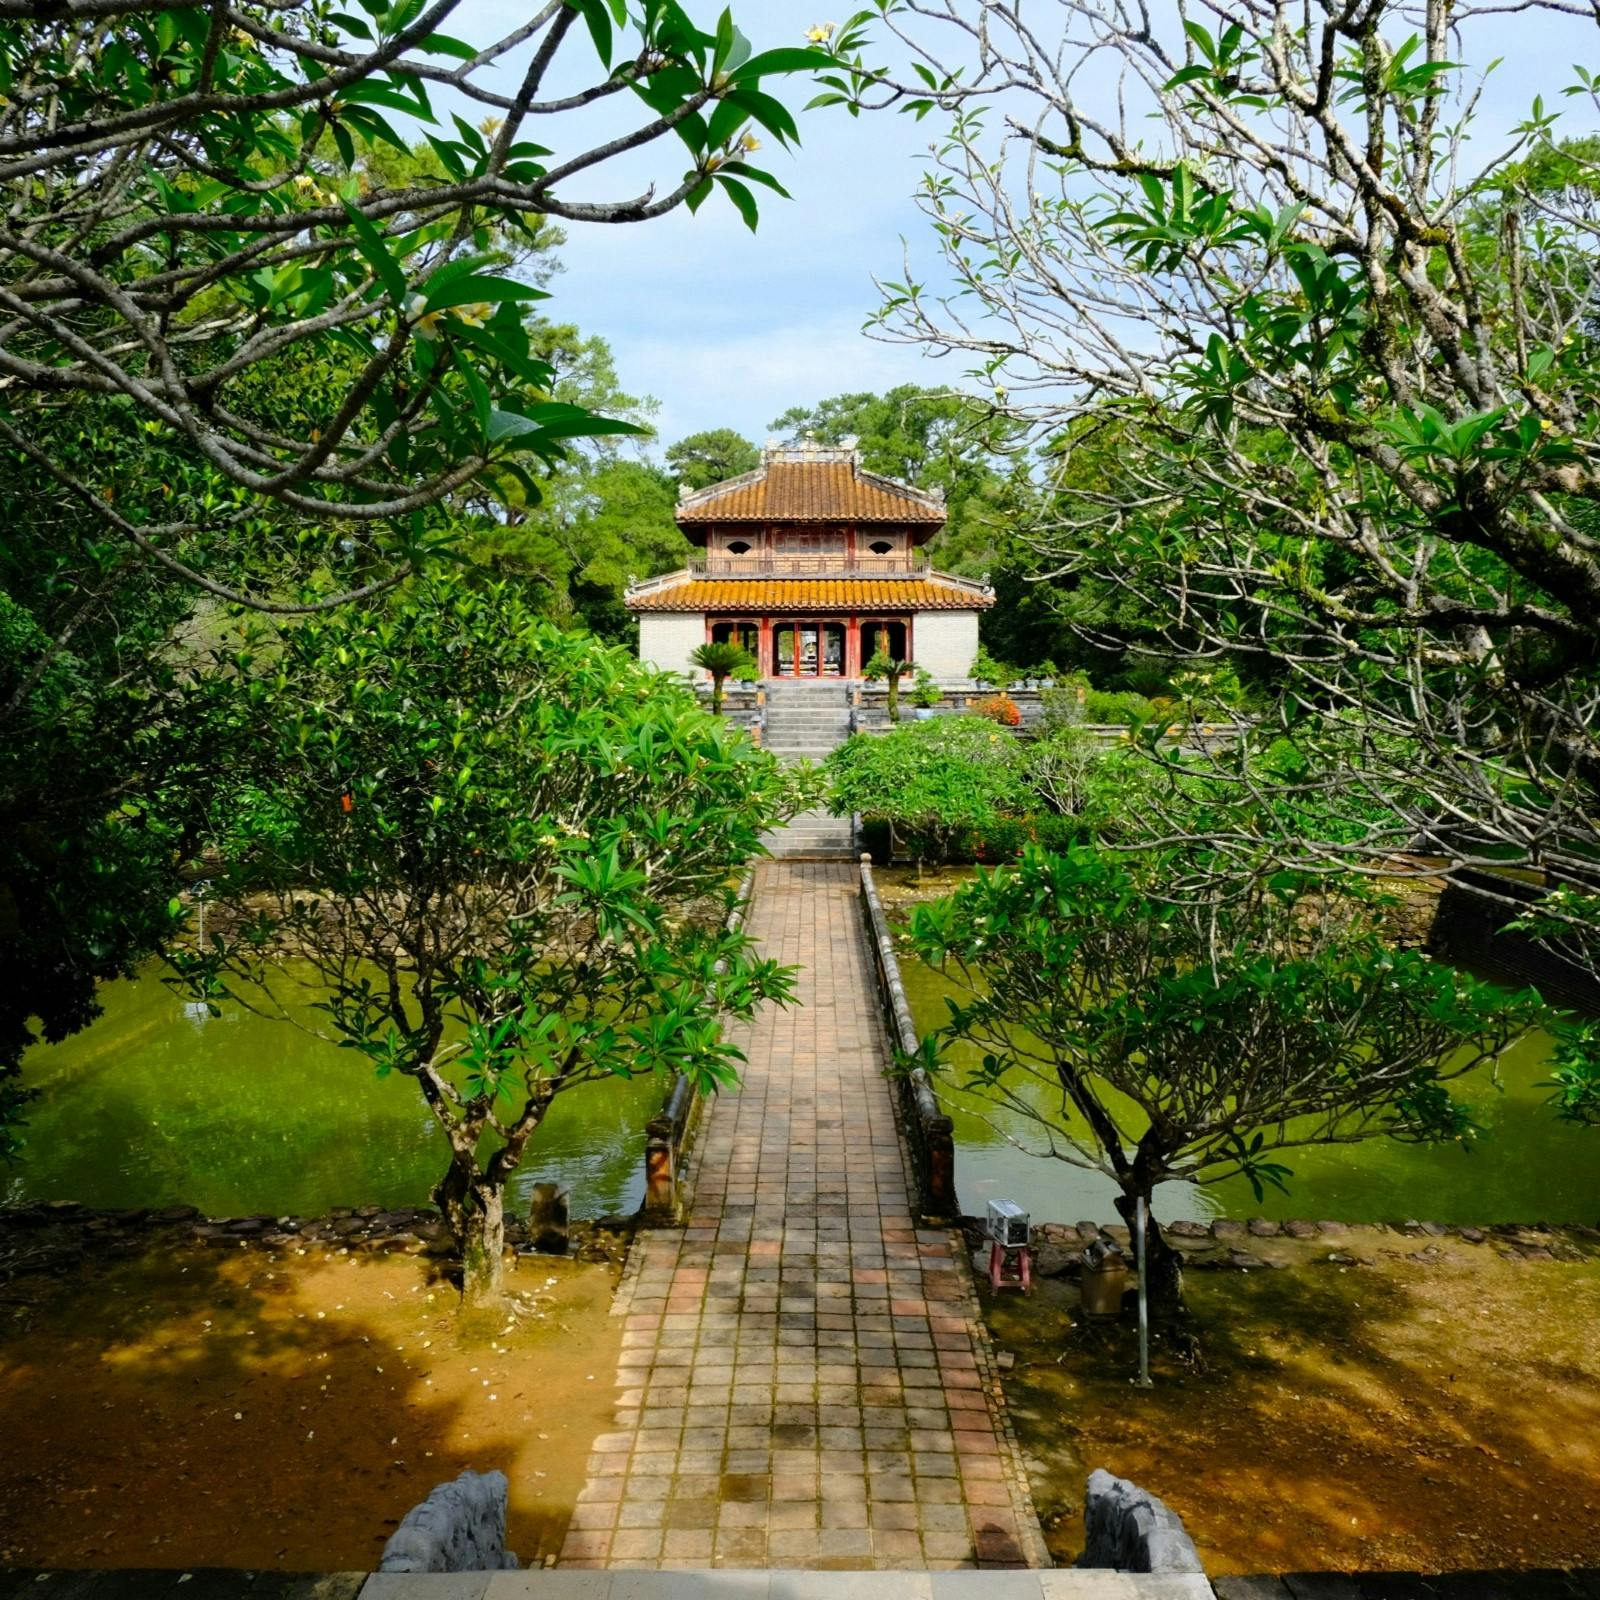 The Last Emperors: Nguyễn Dynasty Sites in Hue